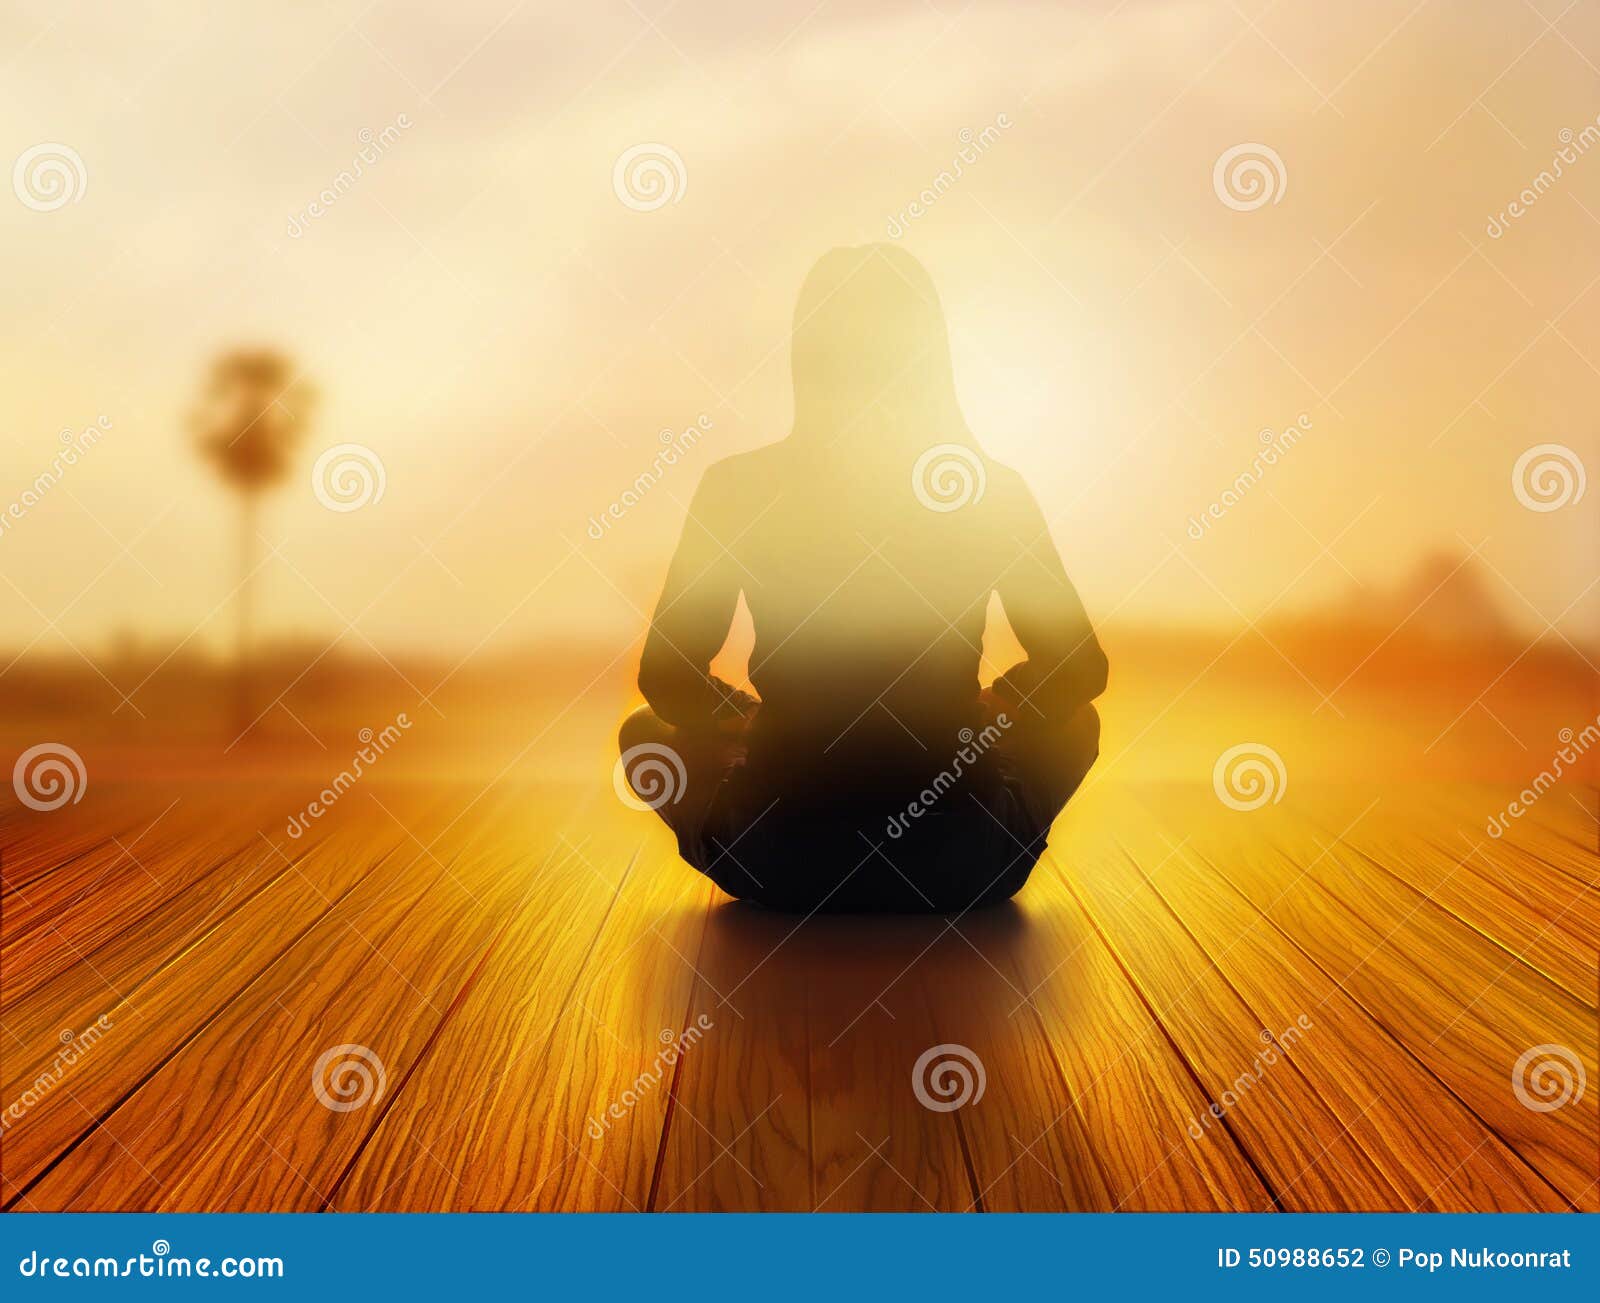 woman was meditating in sunrise and rays of light on landscape, vibrant soft and blur concept